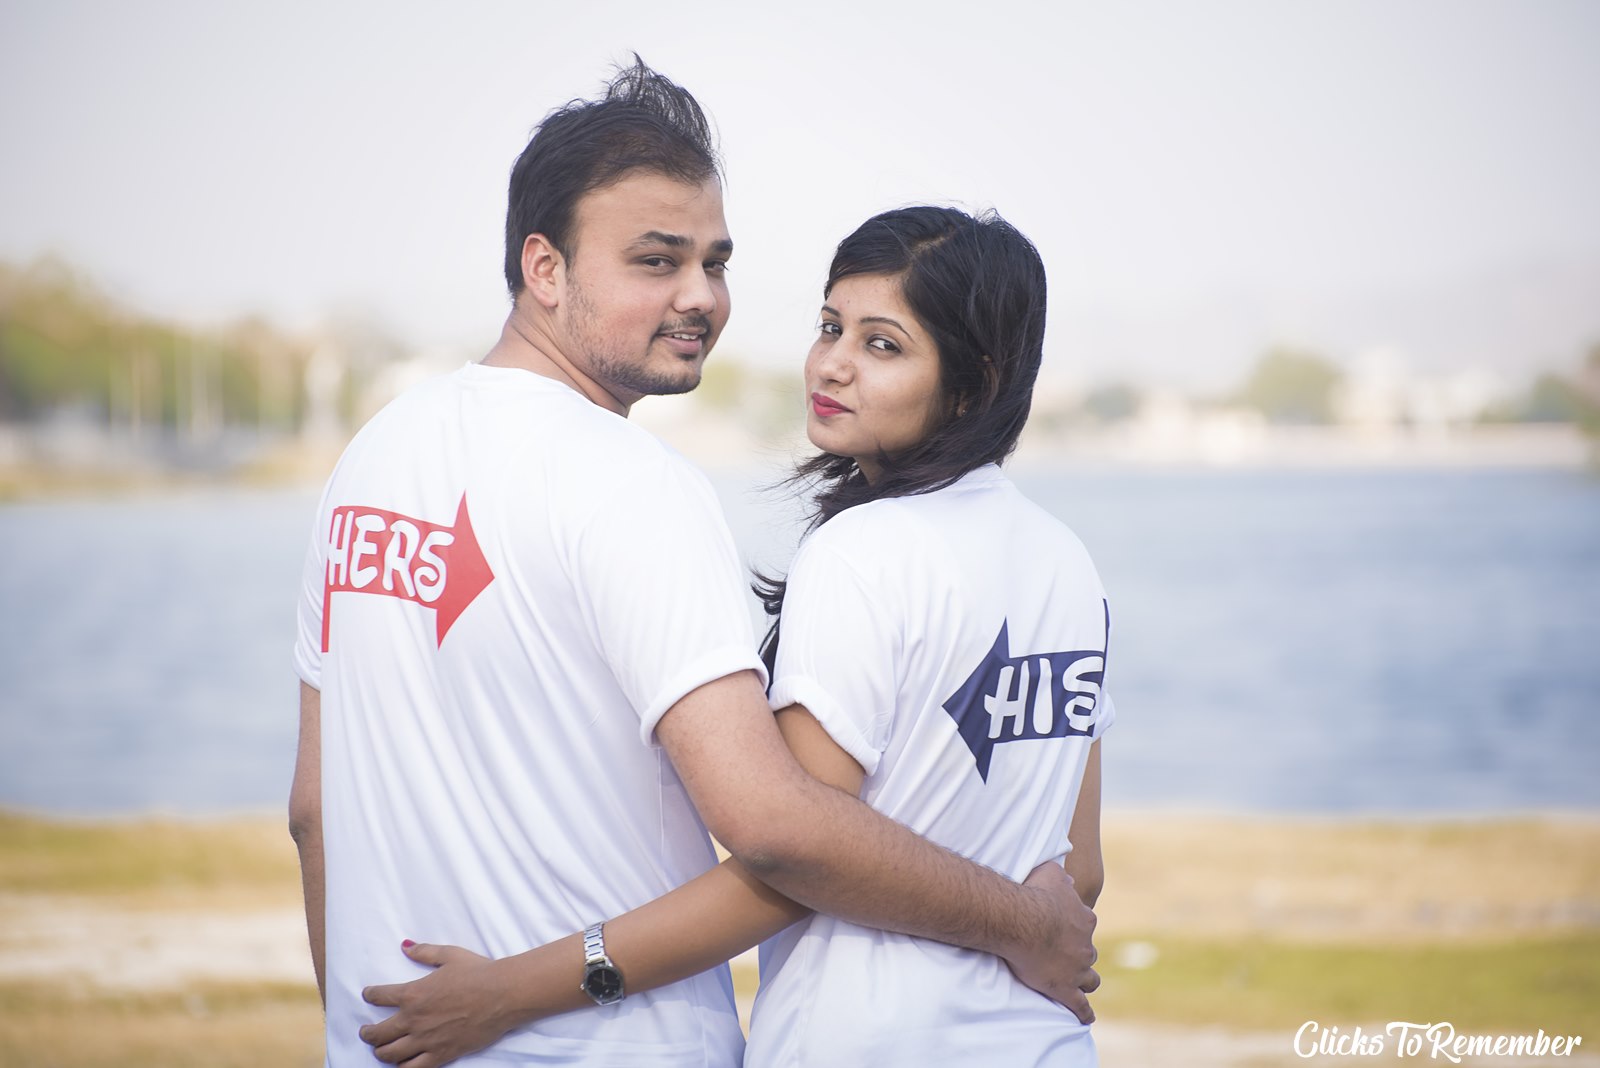 Beautiful Prewedding Photography of couple in Udaipur and Jodhpur 002 Pre wedding shoot of a lovely couple, Khushboo & Hardik, in Udaipur & Jodhpur.